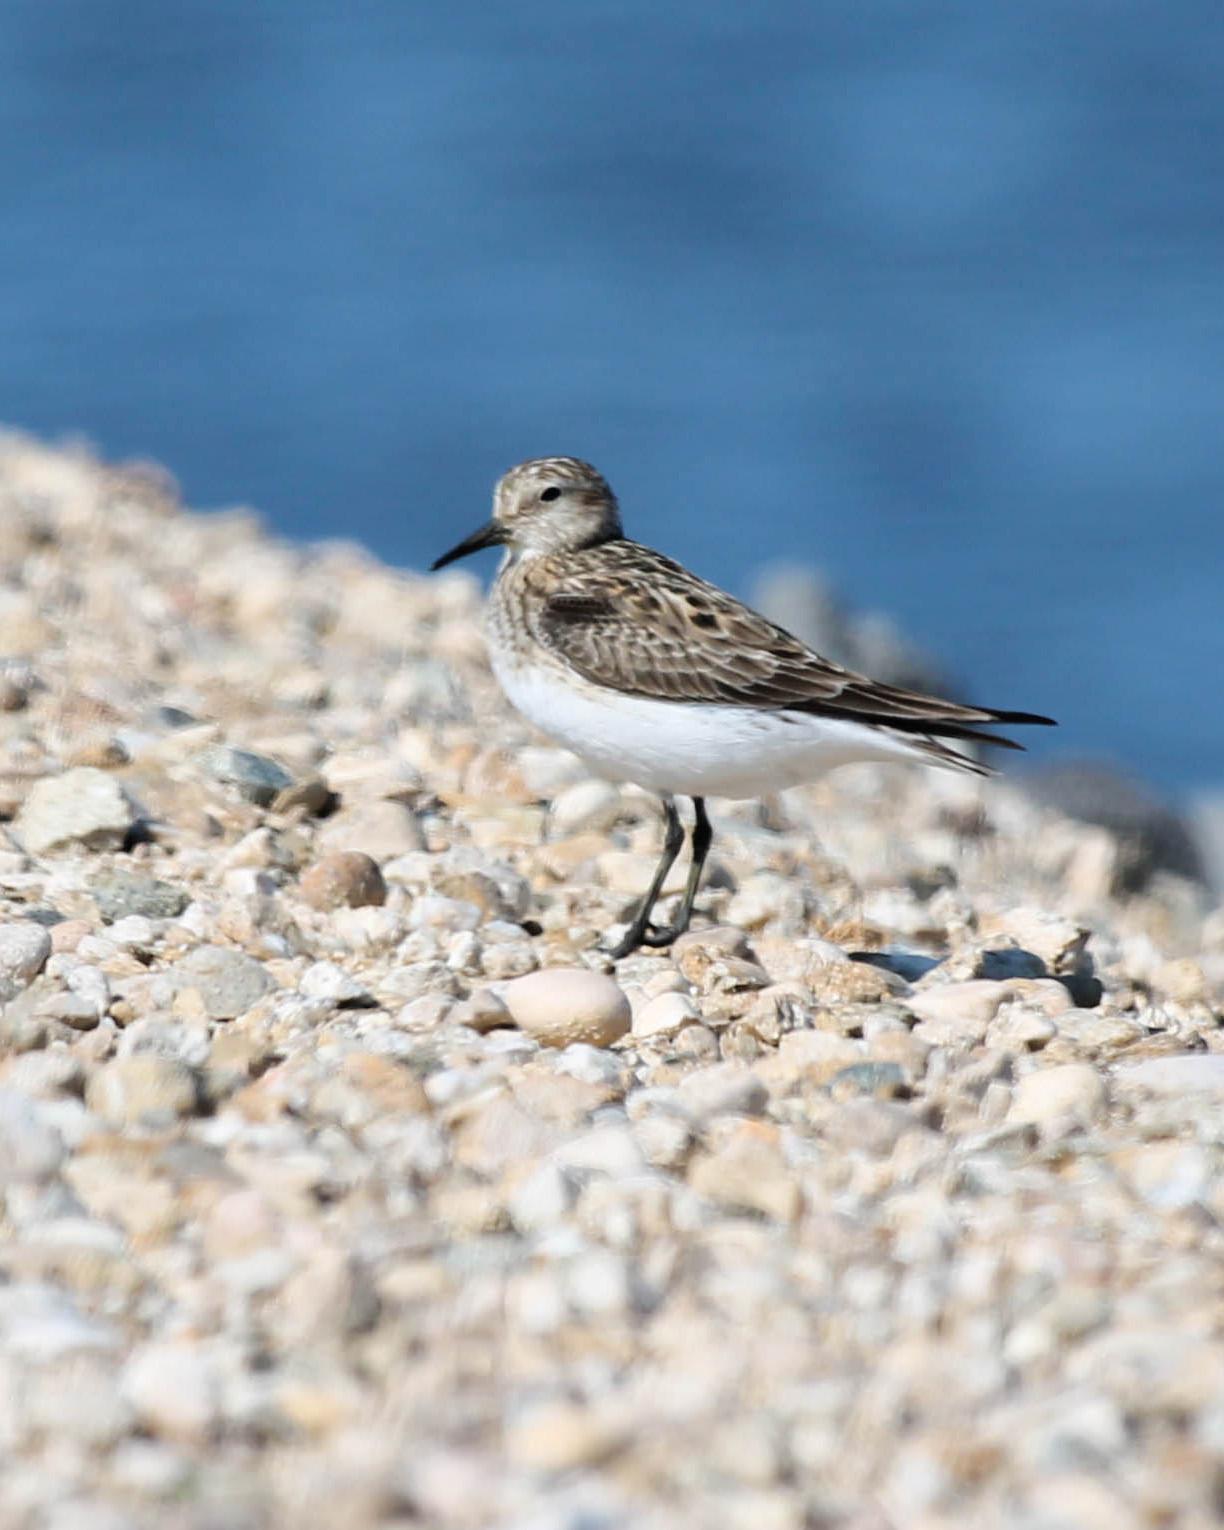 Baird's Sandpiper Photo by Dylan Hopkins